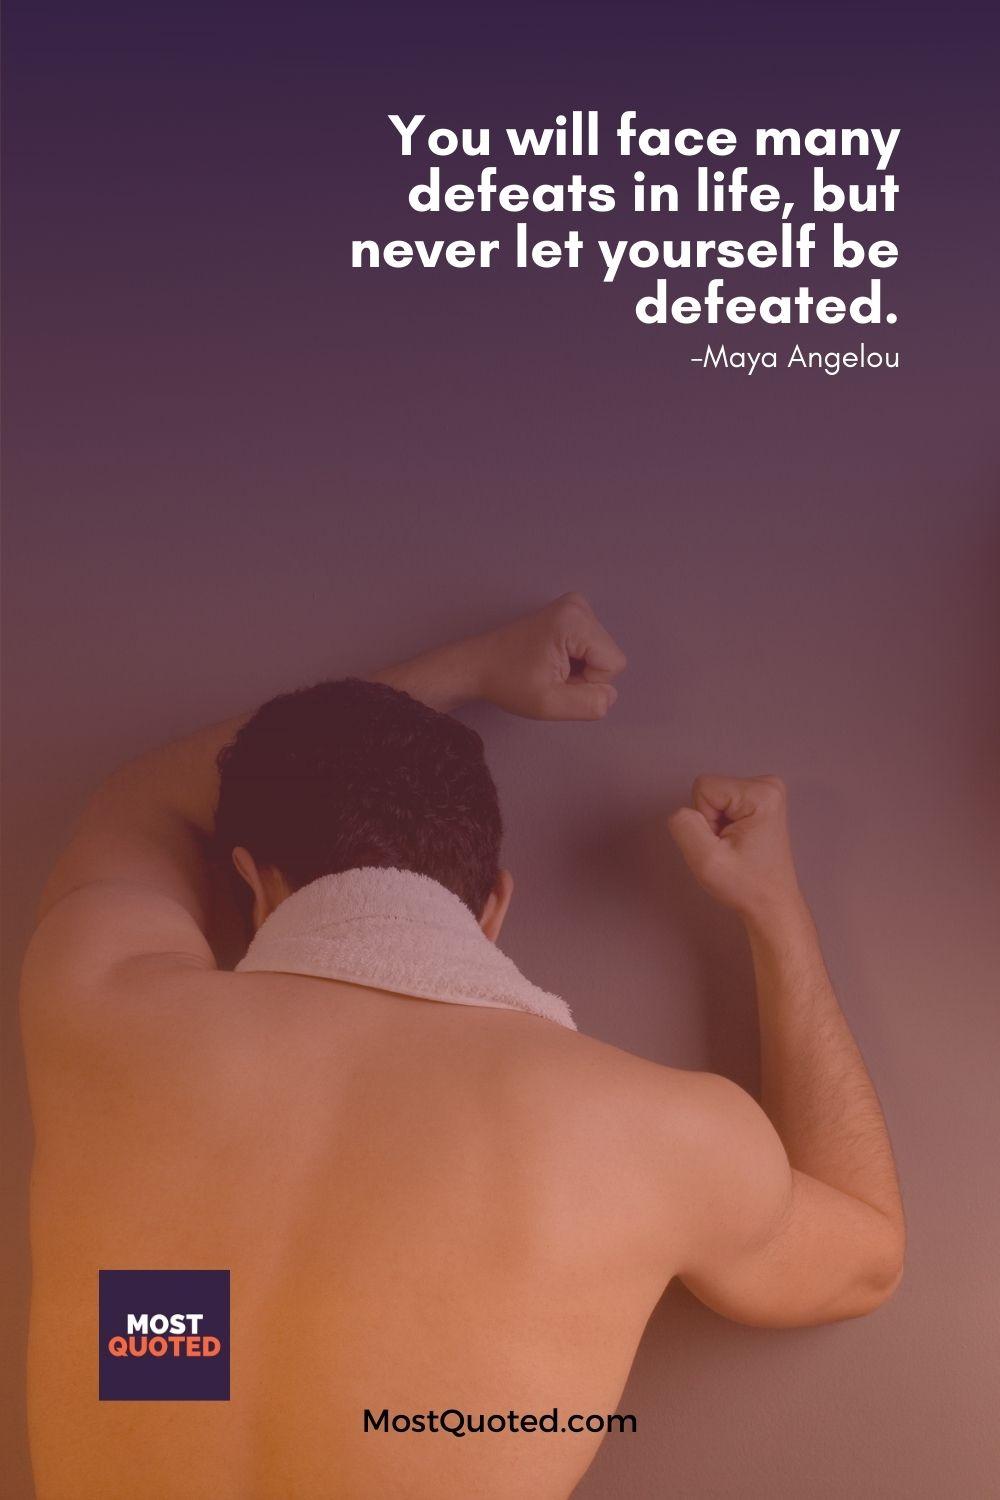 You will face many defeats in life, but never let yourself be defeated. - Maya Angelou